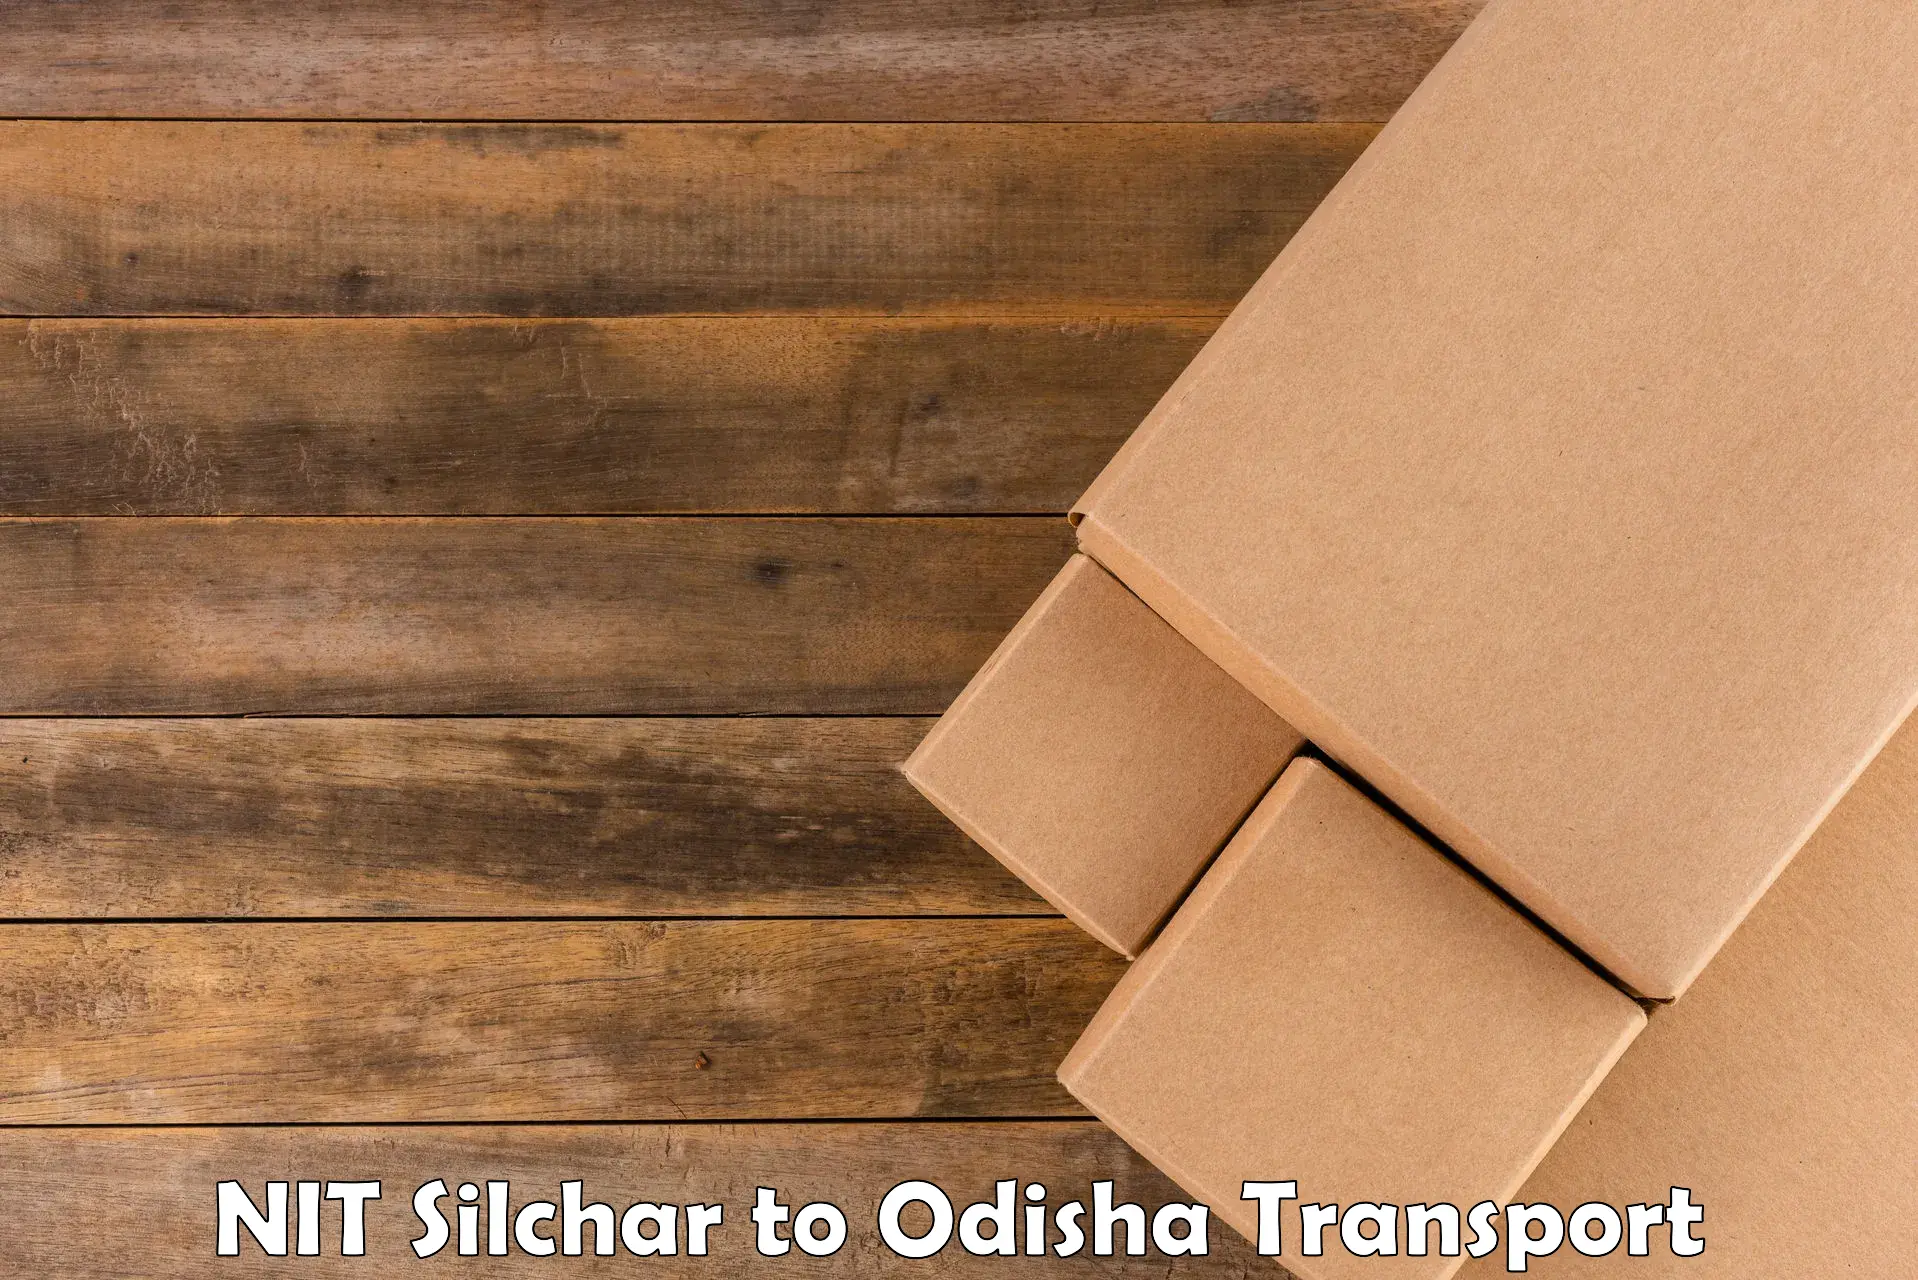 Commercial transport service NIT Silchar to Birmitrapur